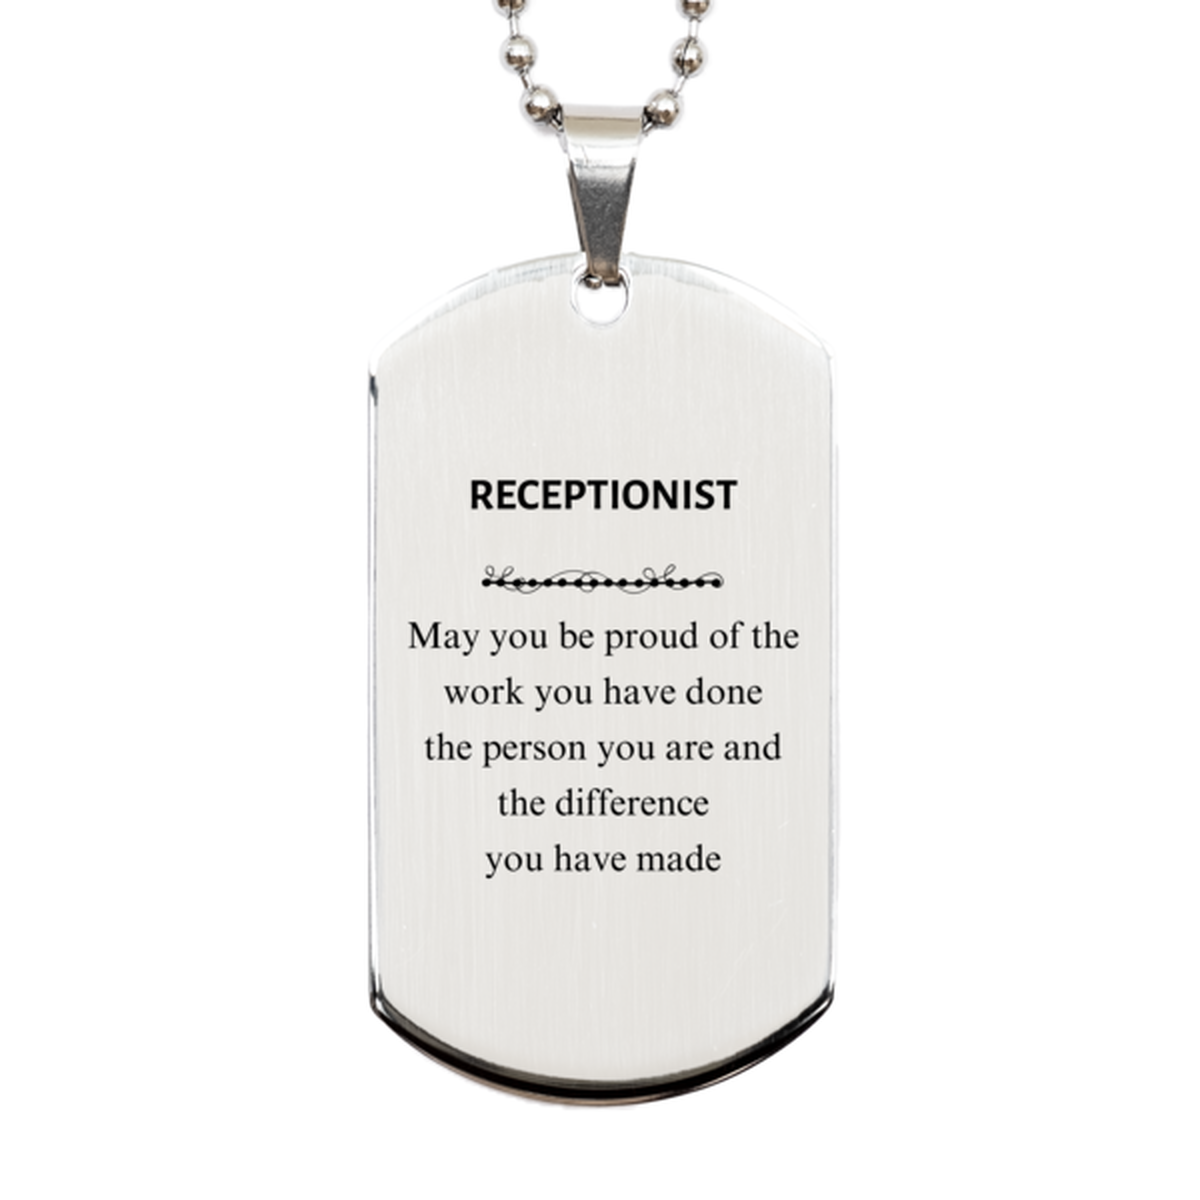 Receptionist May you be proud of the work you have done, Retirement Receptionist Silver Dog Tag for Colleague Appreciation Gifts Amazing for Receptionist